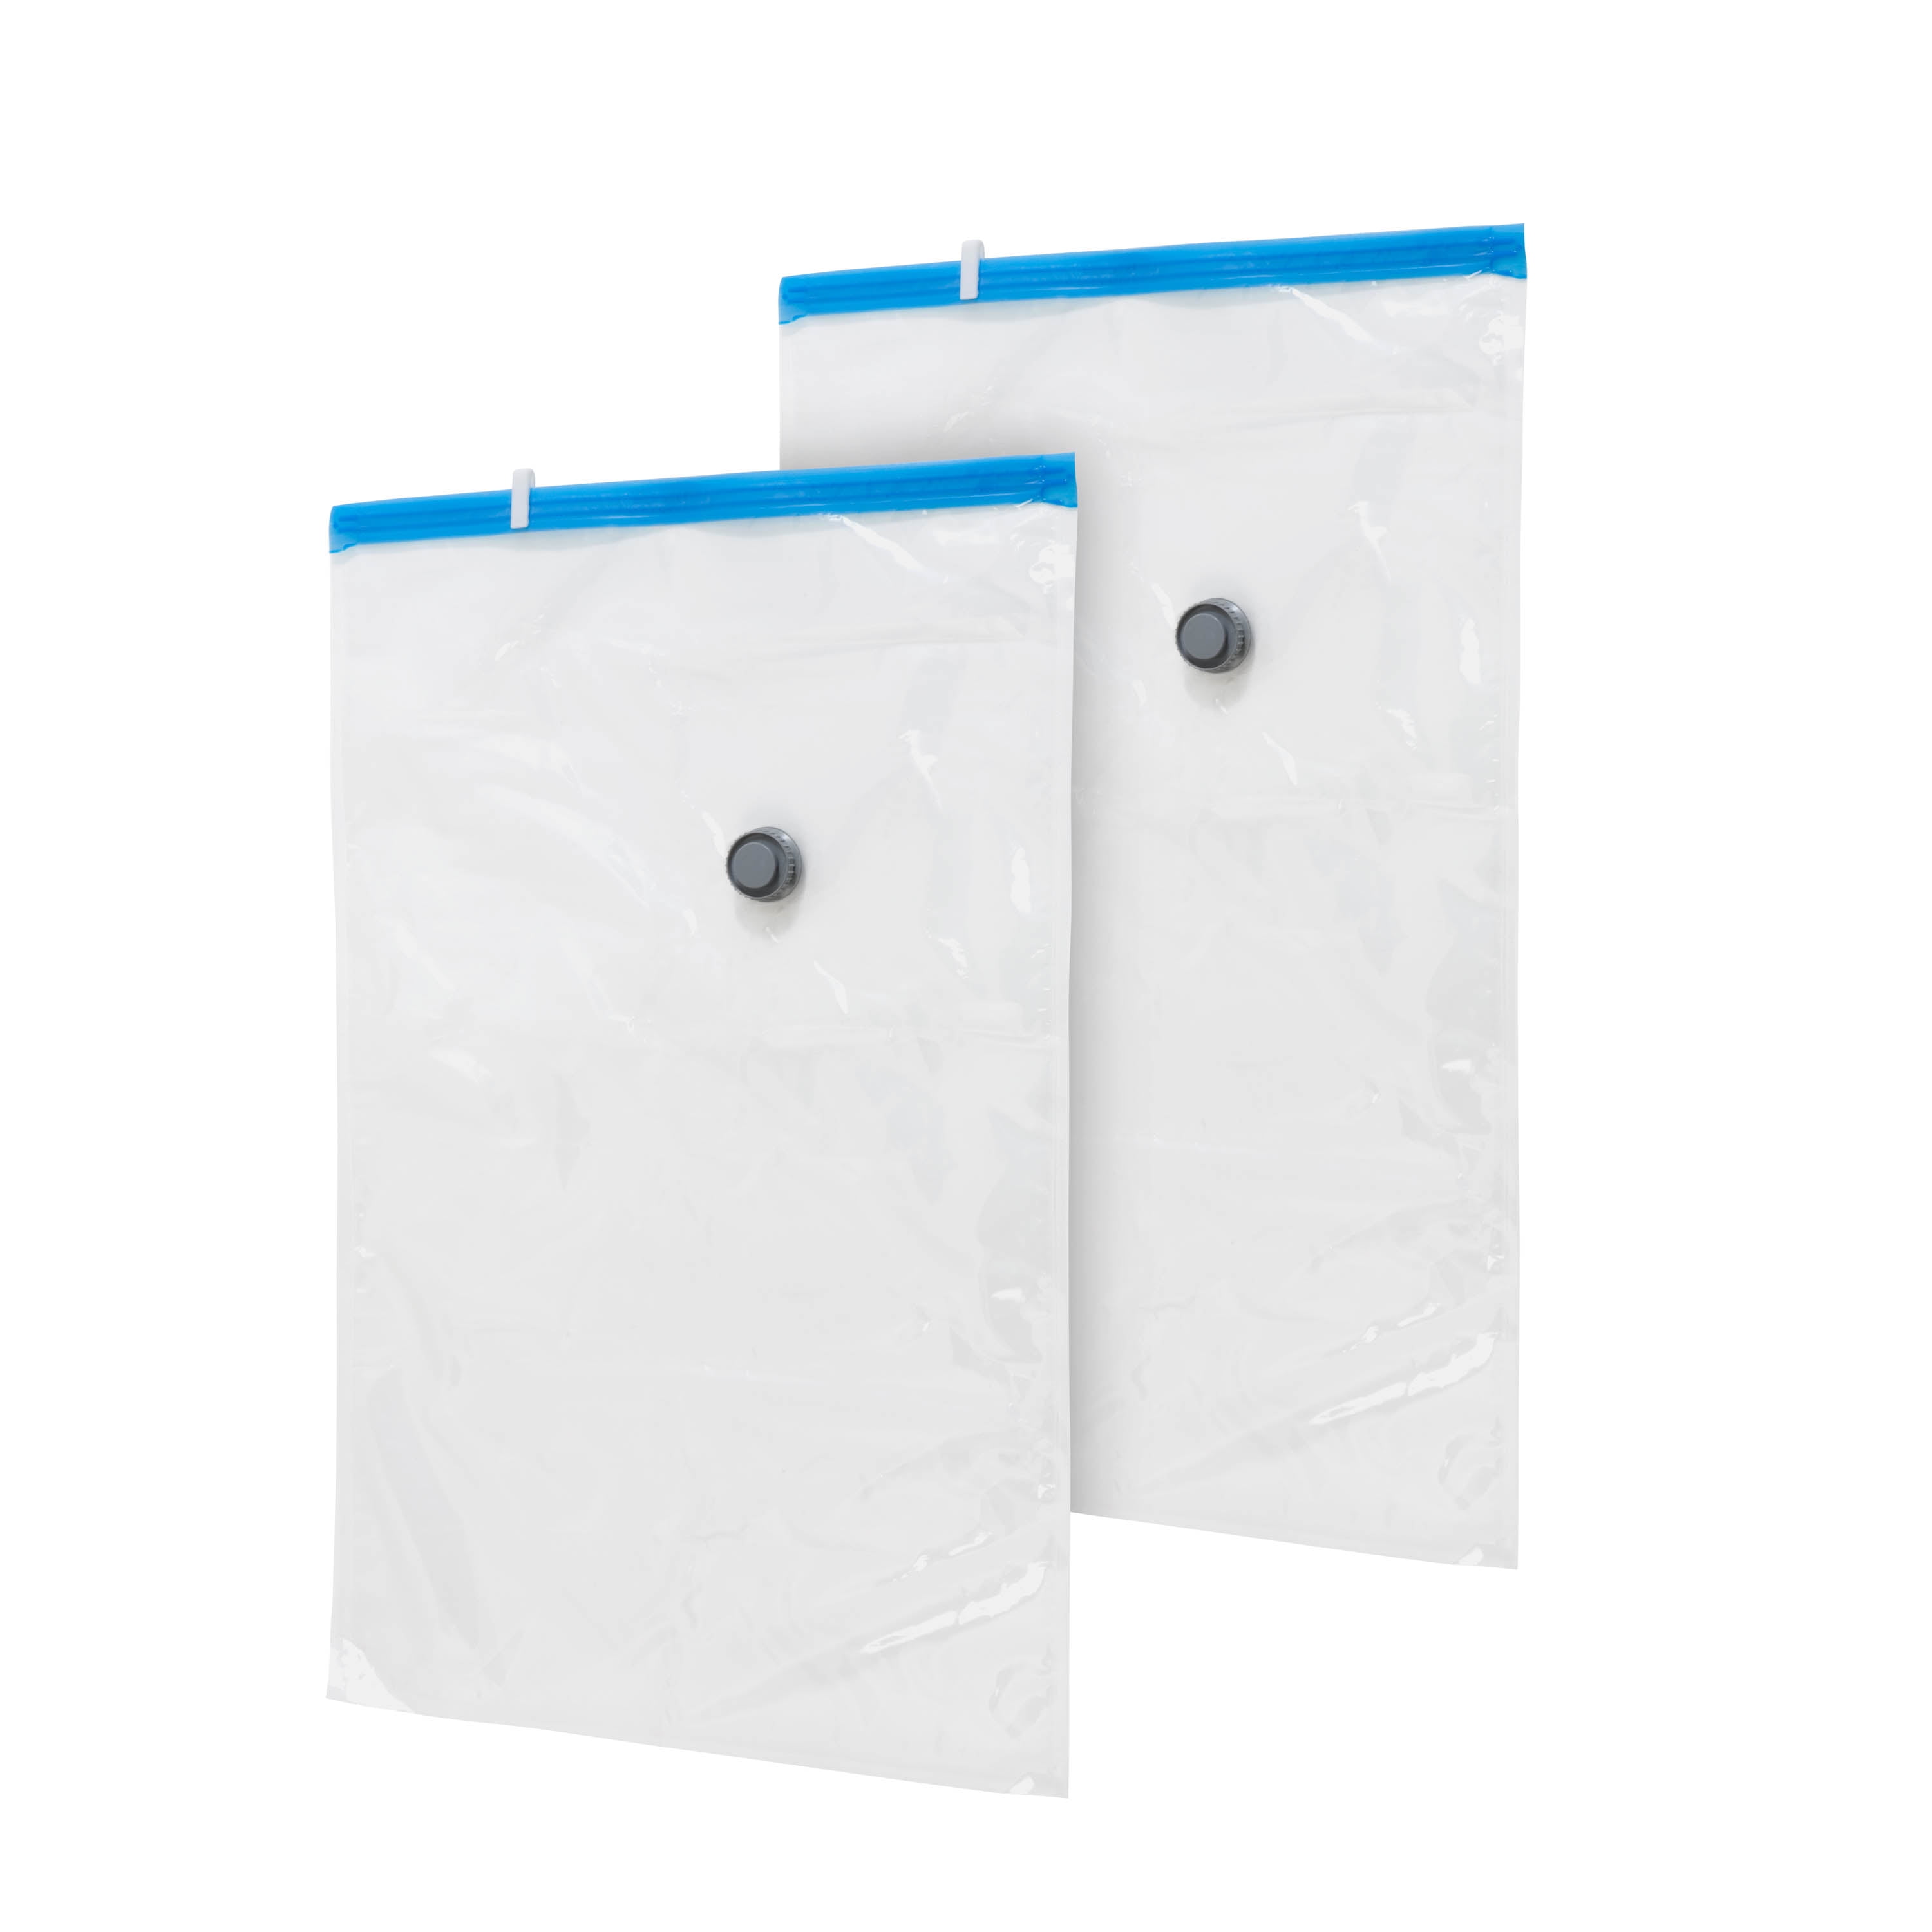 Discover vacuum bags - huge selection at Lava